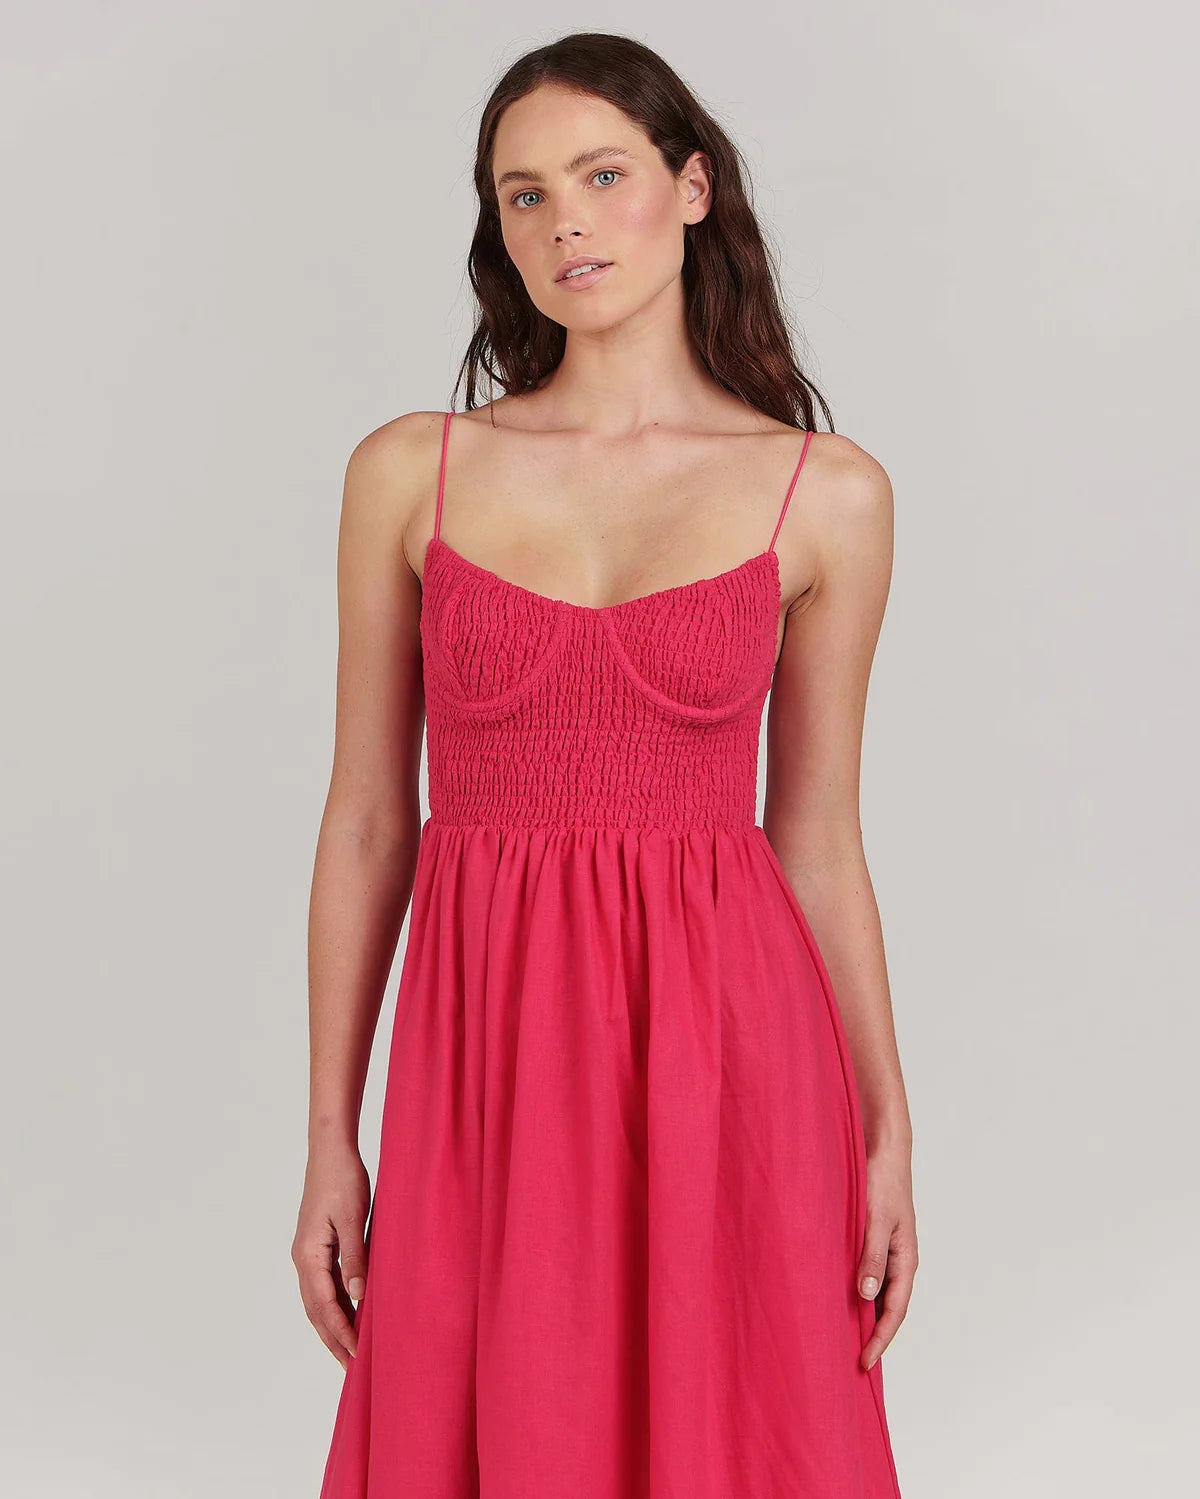 With its fitted bodice and gathered skirt, this linen-blend maxi dress by Charlie Holiday is a beauty in eye-catching fuchsia. Dress it up for cocktails with sky-high heels and a cute clutch.